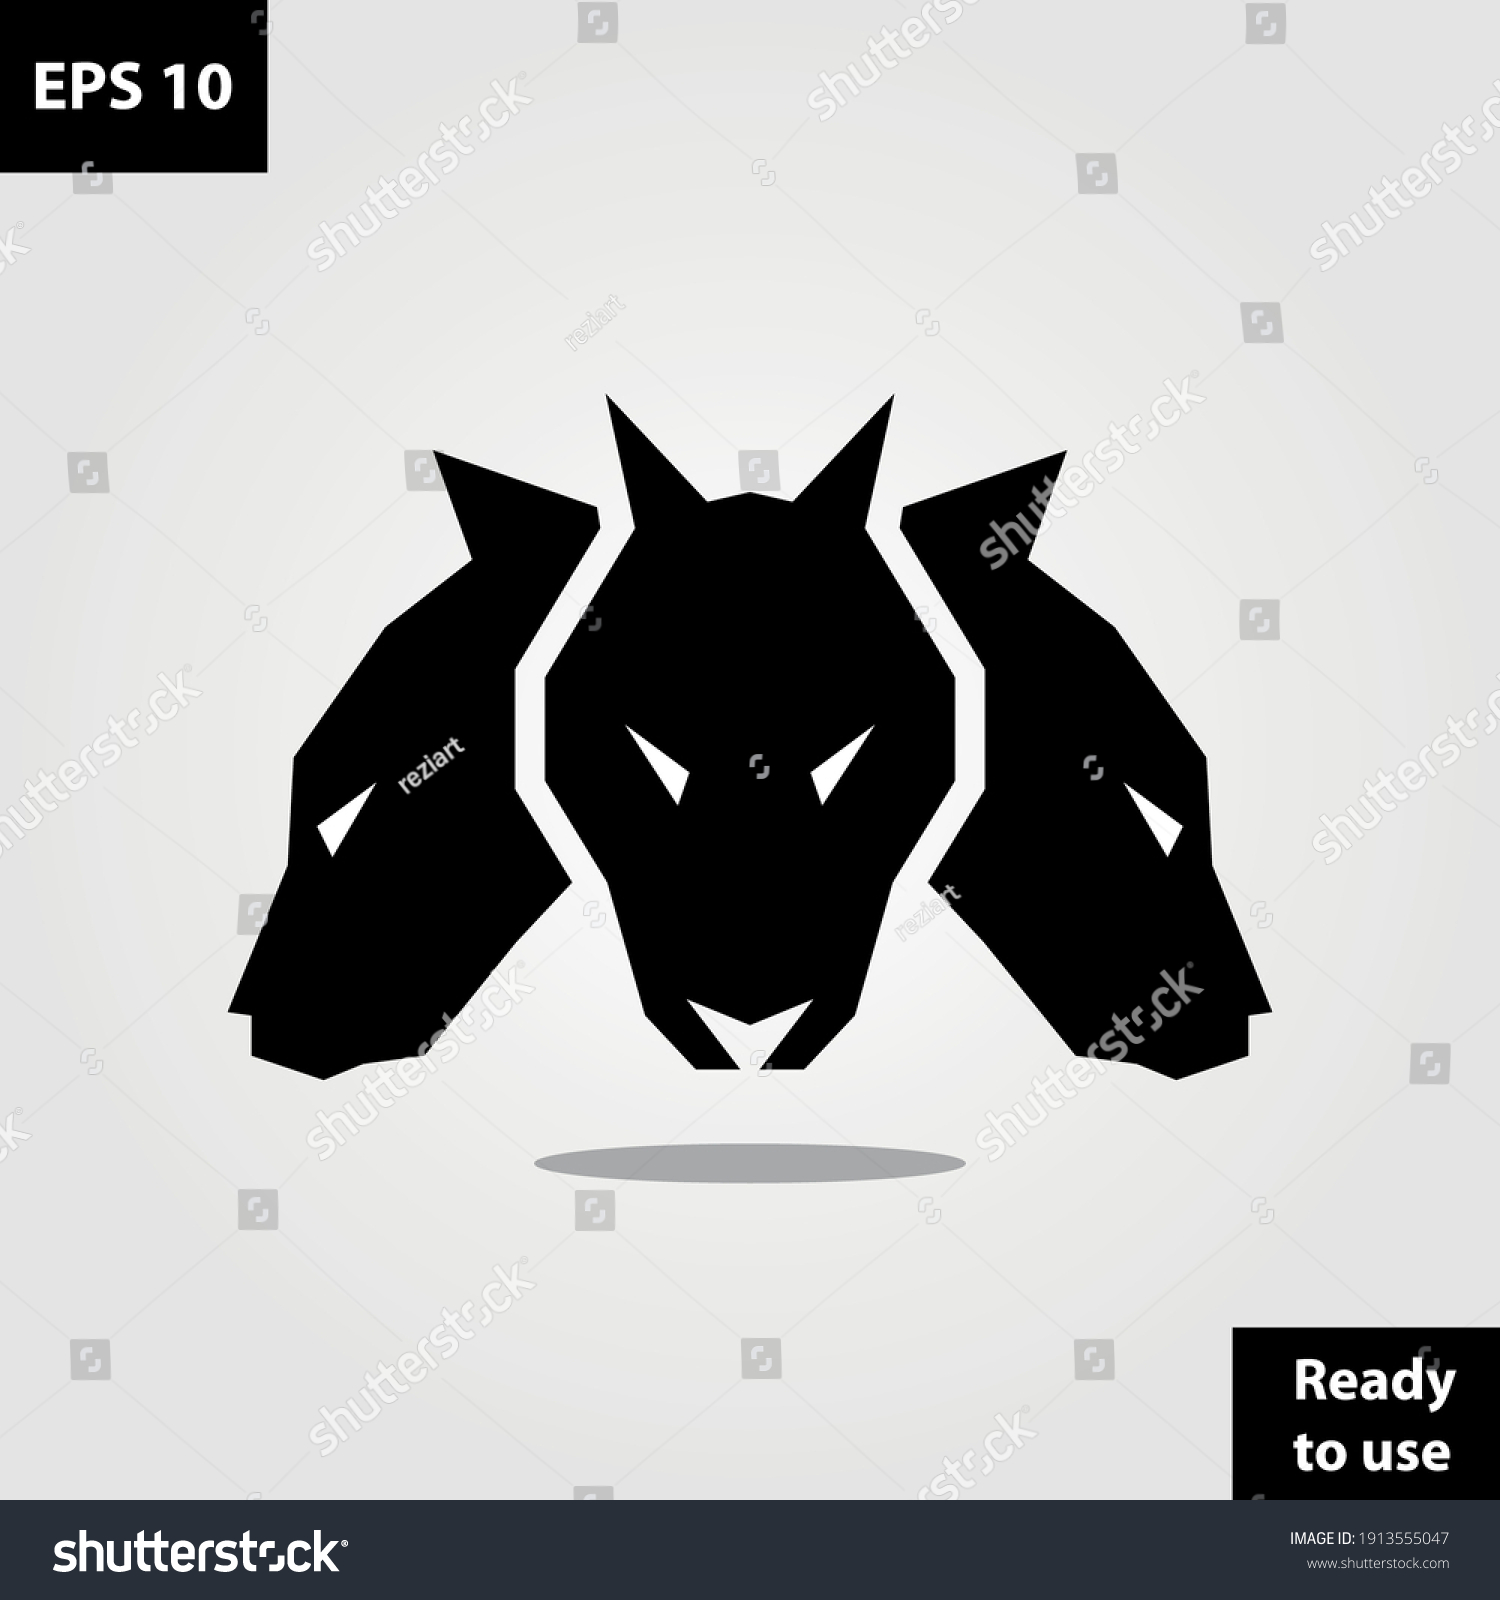 SVG of Cerberus three head hound dog logo company, logo vector template design. Ready to use, easy for edit. svg